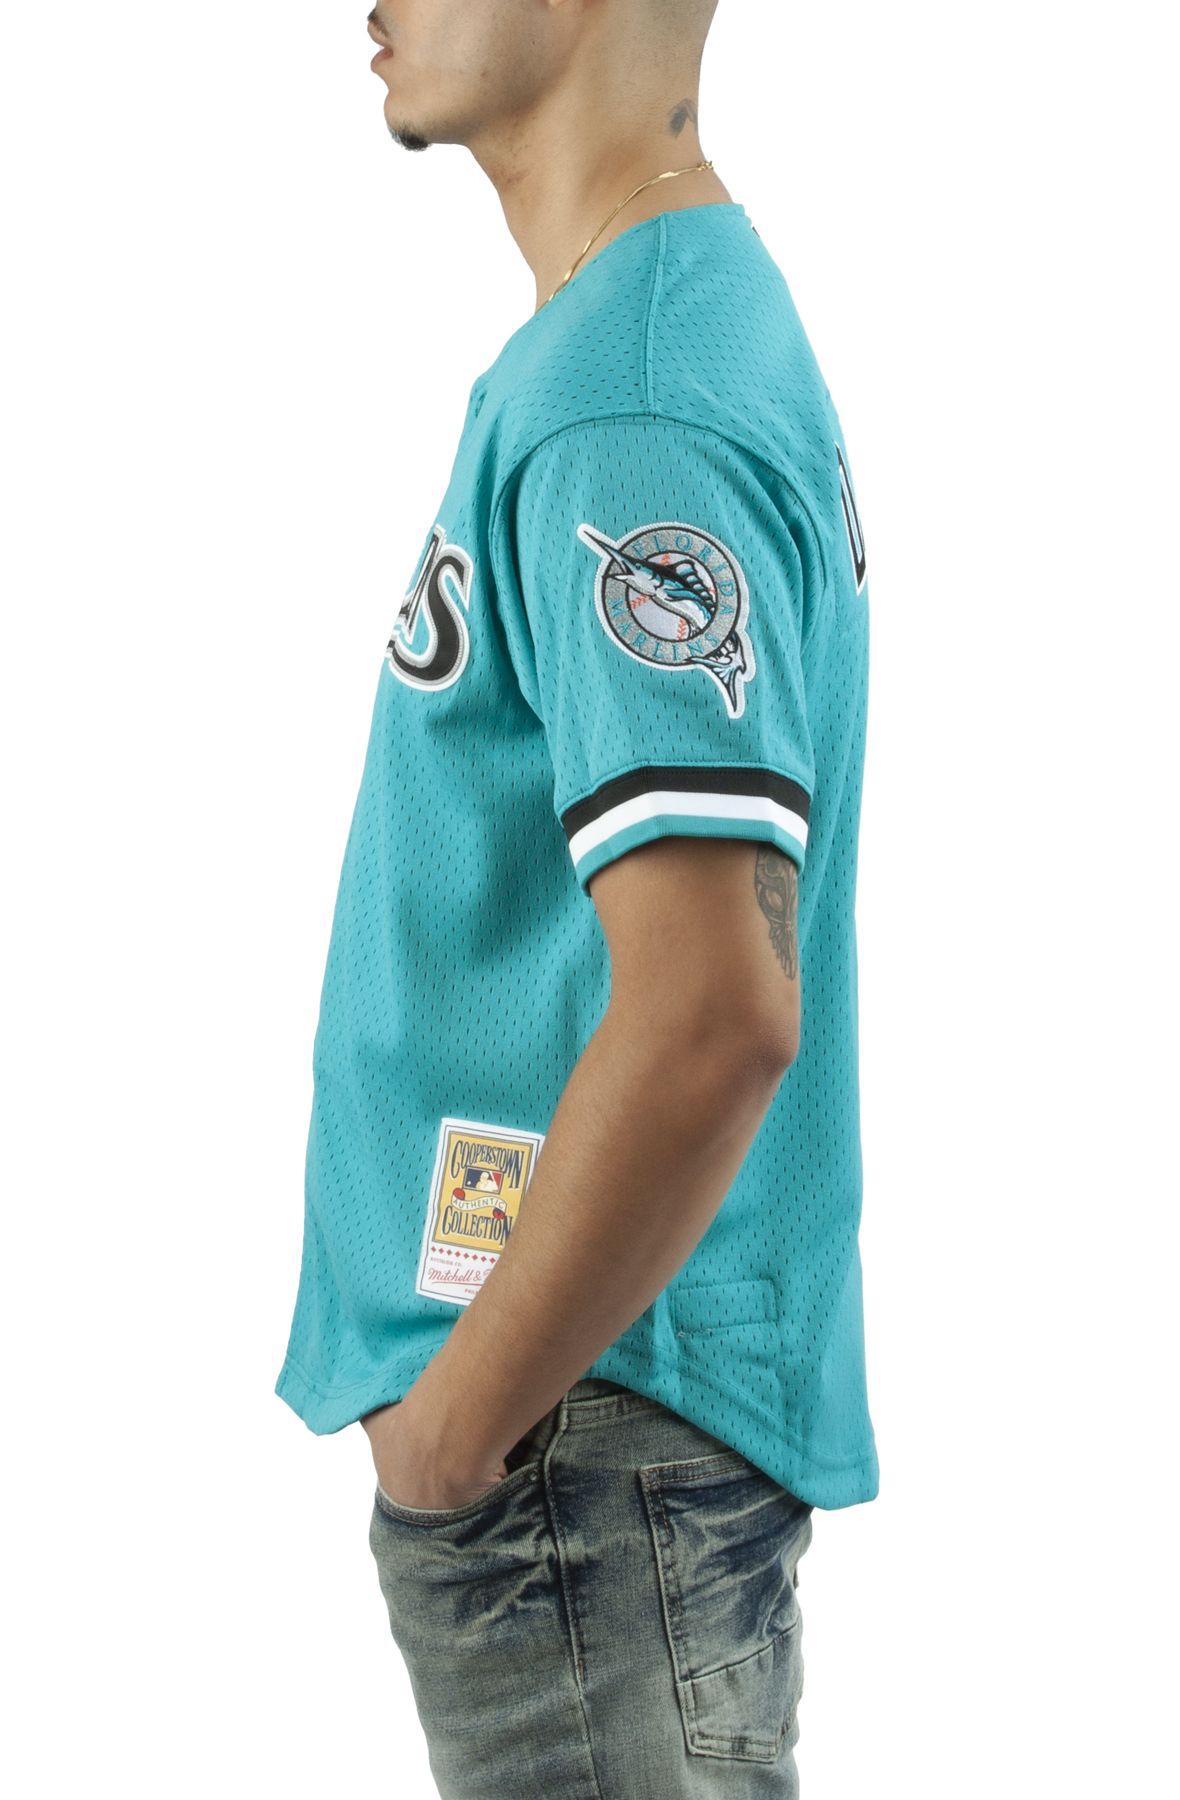 MITCHELL AND NESS FLORDIA MARLINS JERSEY ABBF3104-FMA95ADATEAL - Shiekh